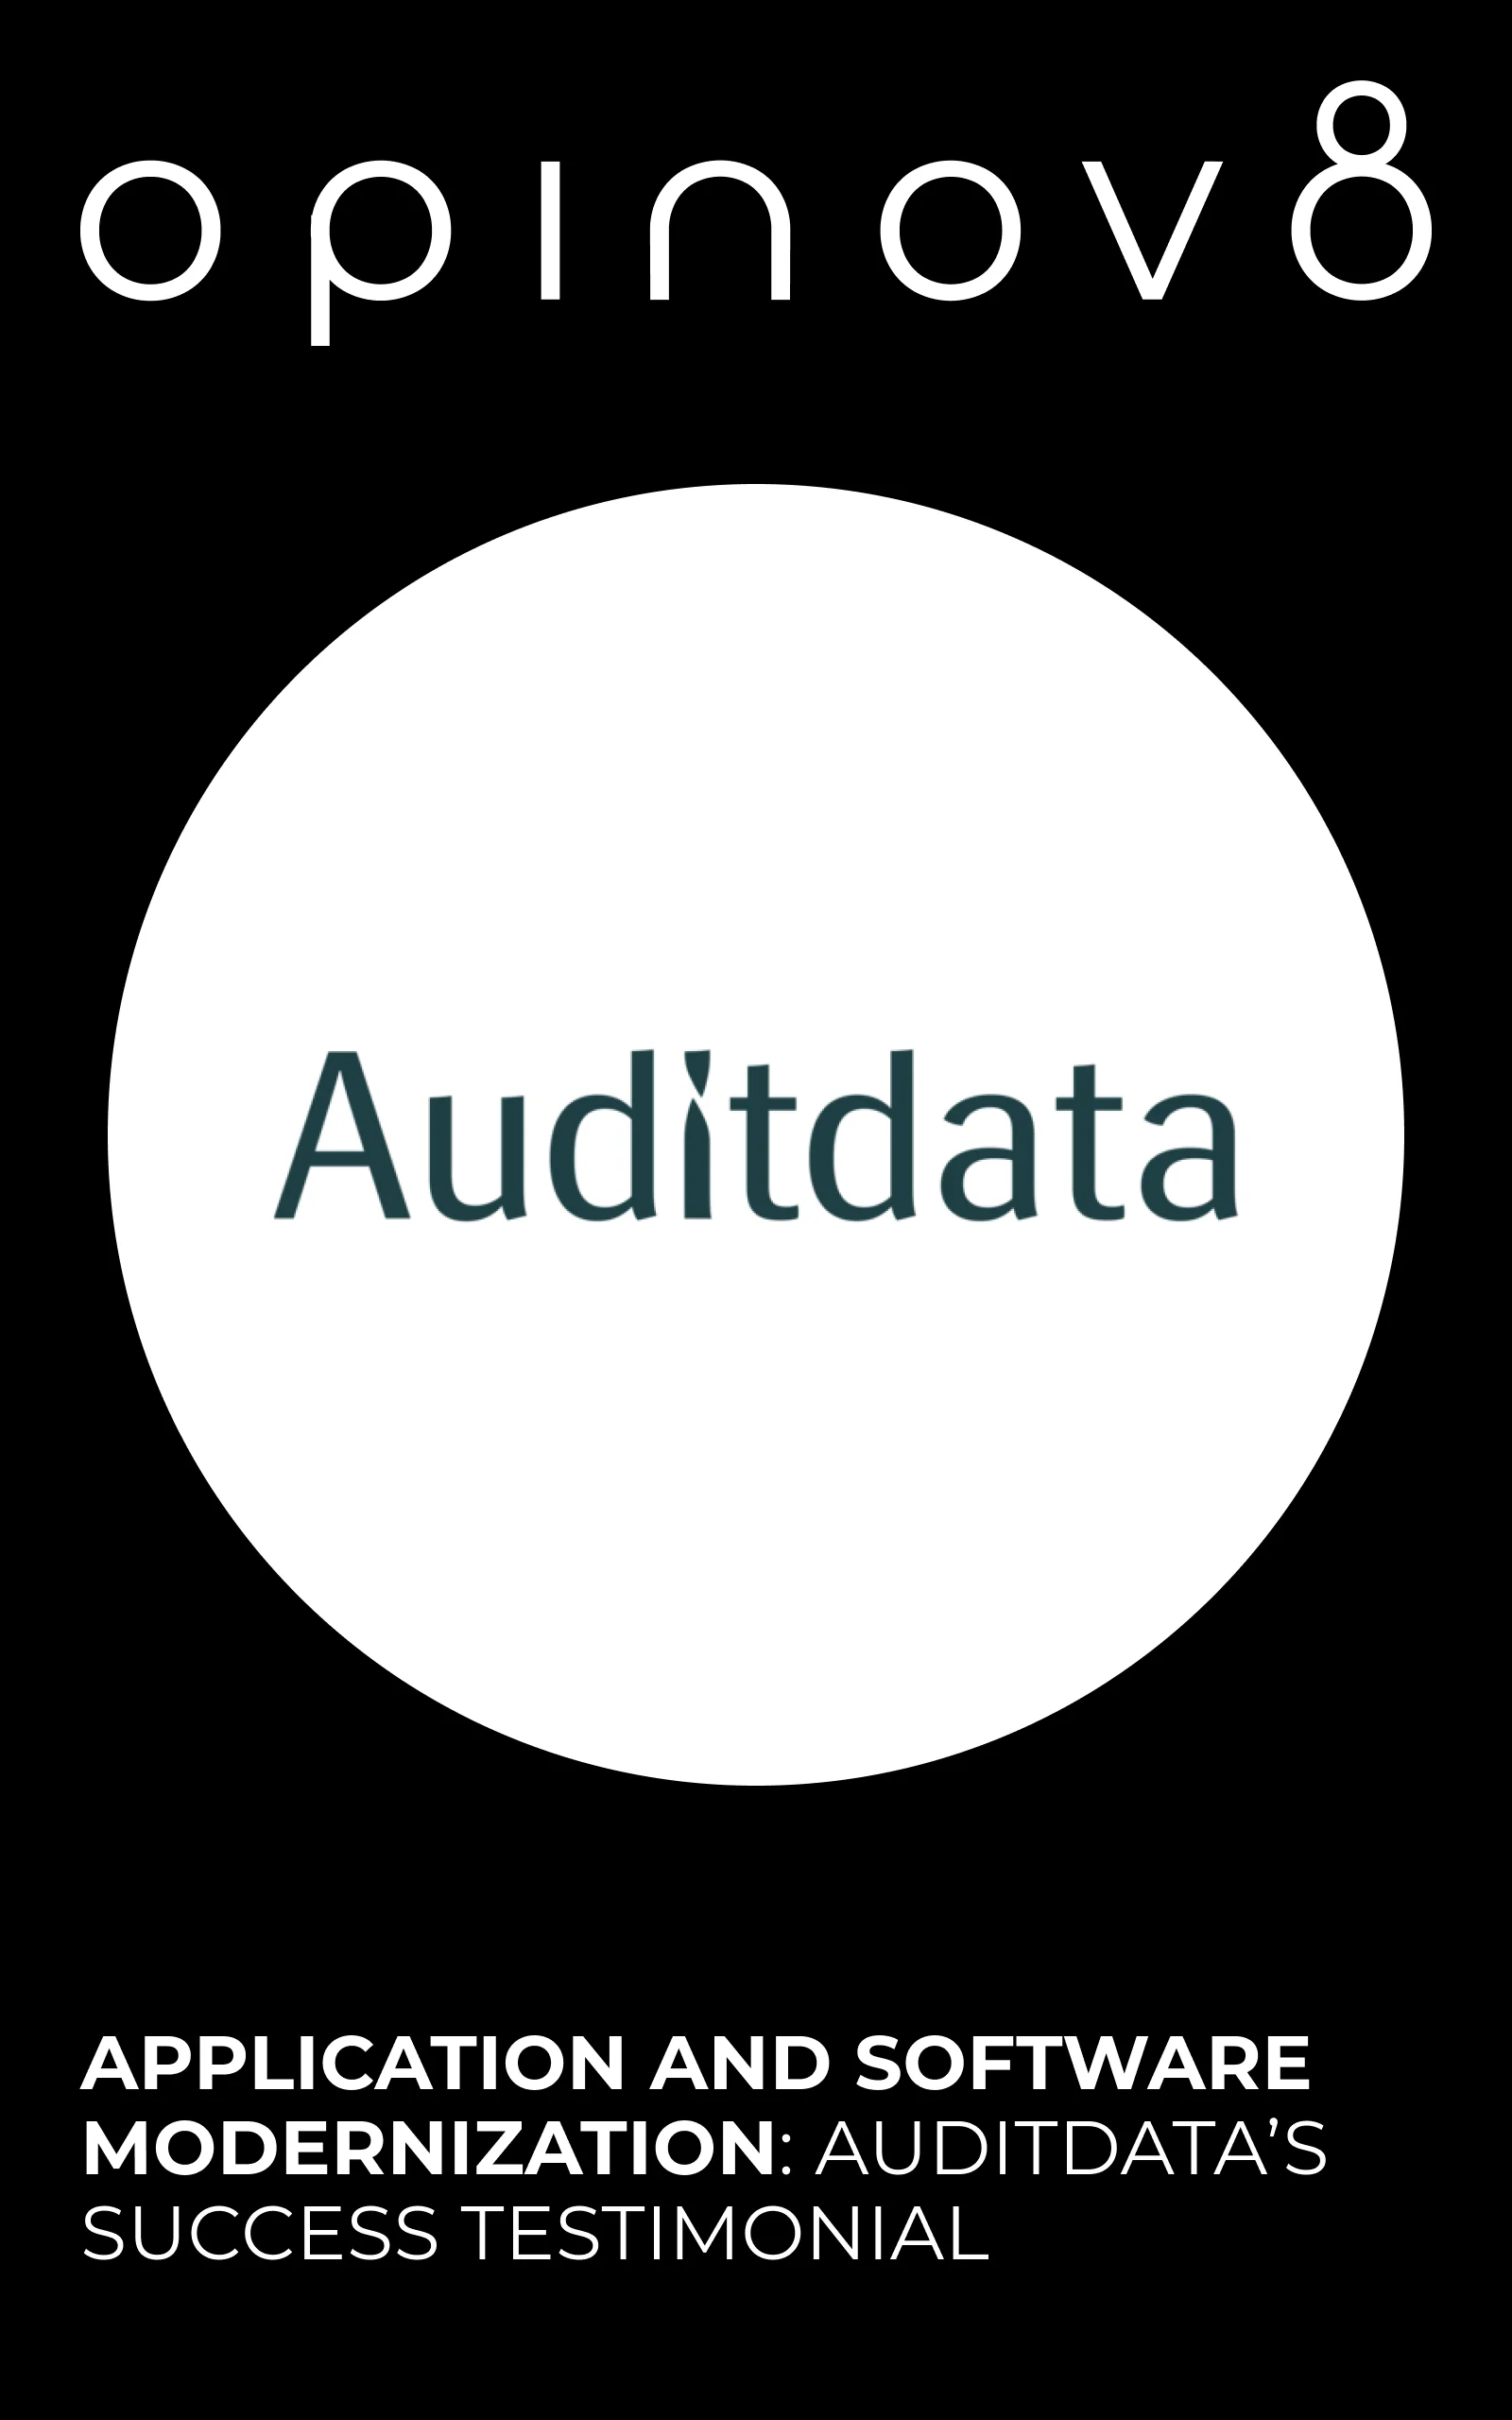 Application and Software Modernization: Auditdata’s success story